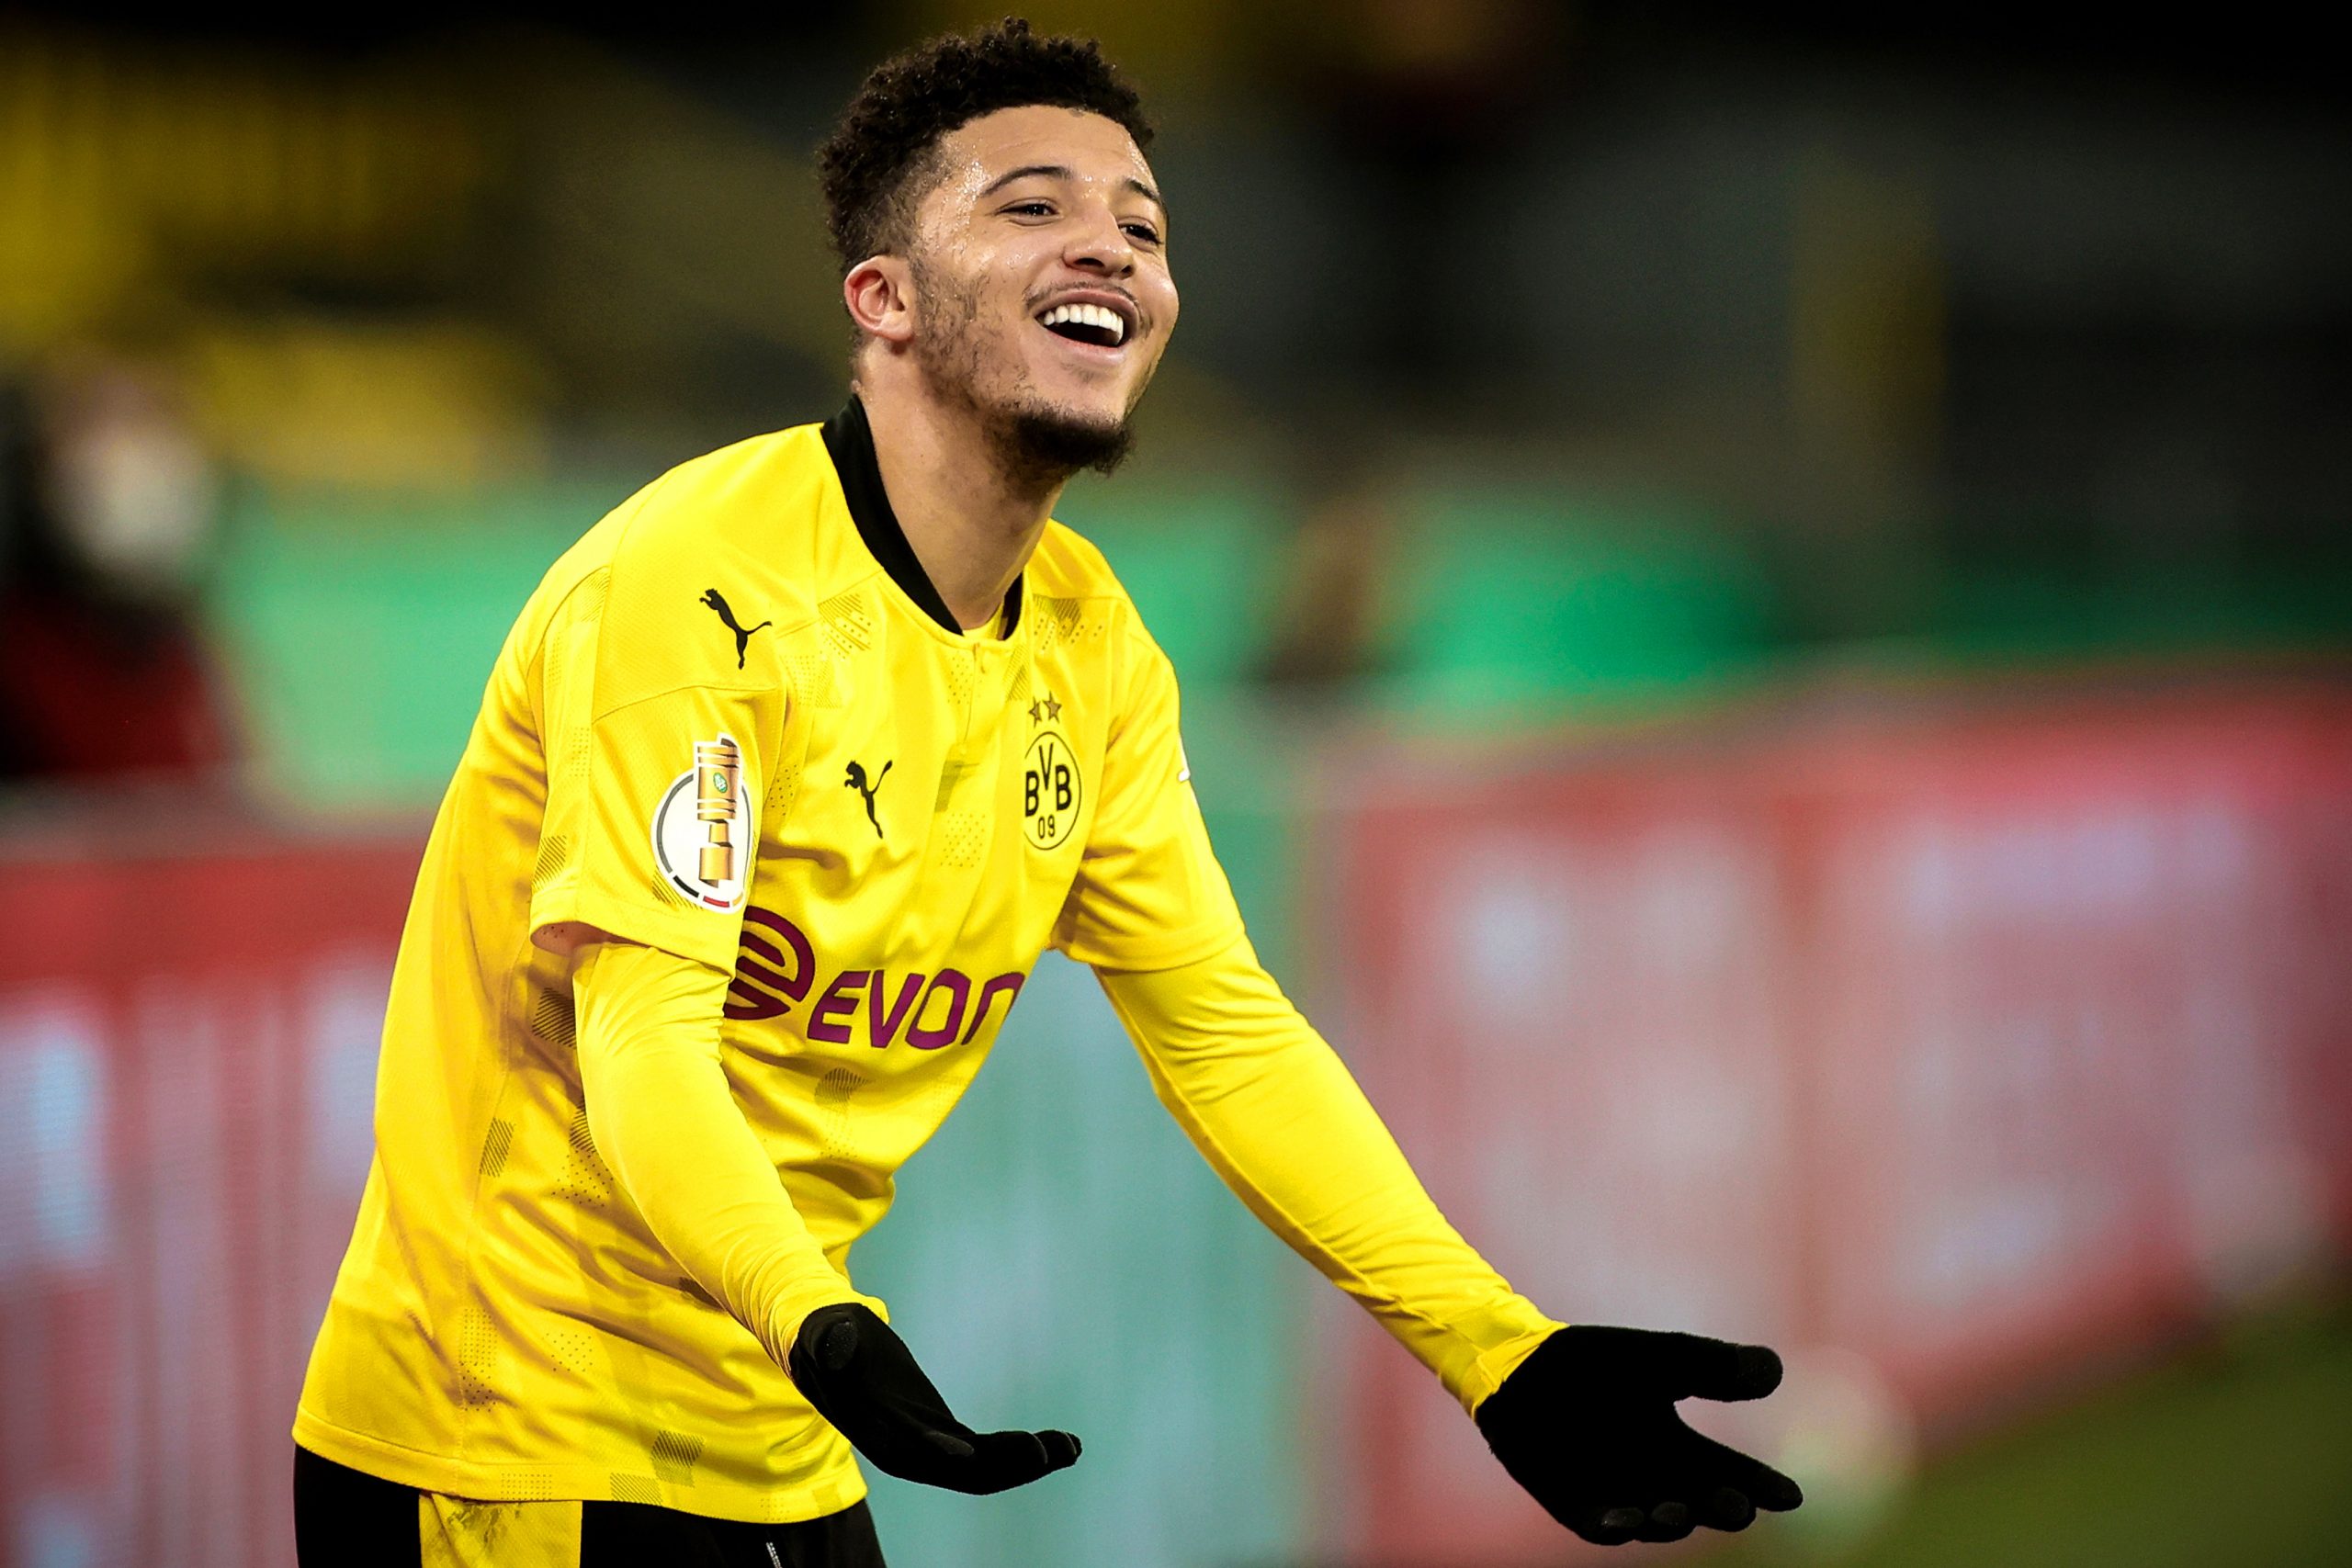 epa09314984 (FILE) - Dortmund's Jadon Sancho reacts during the German DFB Cup round of 16 soccer match between Borussia Dortmund and SC Paderborn 07 in Dortmund, Germany, 02 February 2021 (re-issued on 01 July 2021). England winger Jadon Sancho is set to join English Premier League soccer club Manchester United for a reported transfer fee of about 73 million pound (84.8 million euro), after Manchester United reached an agreement with German Bundesliga side Borussia Dortmund on 30 June 2021.  EPA/FRIEDEMANN VOGEL *** Local Caption *** 56666680